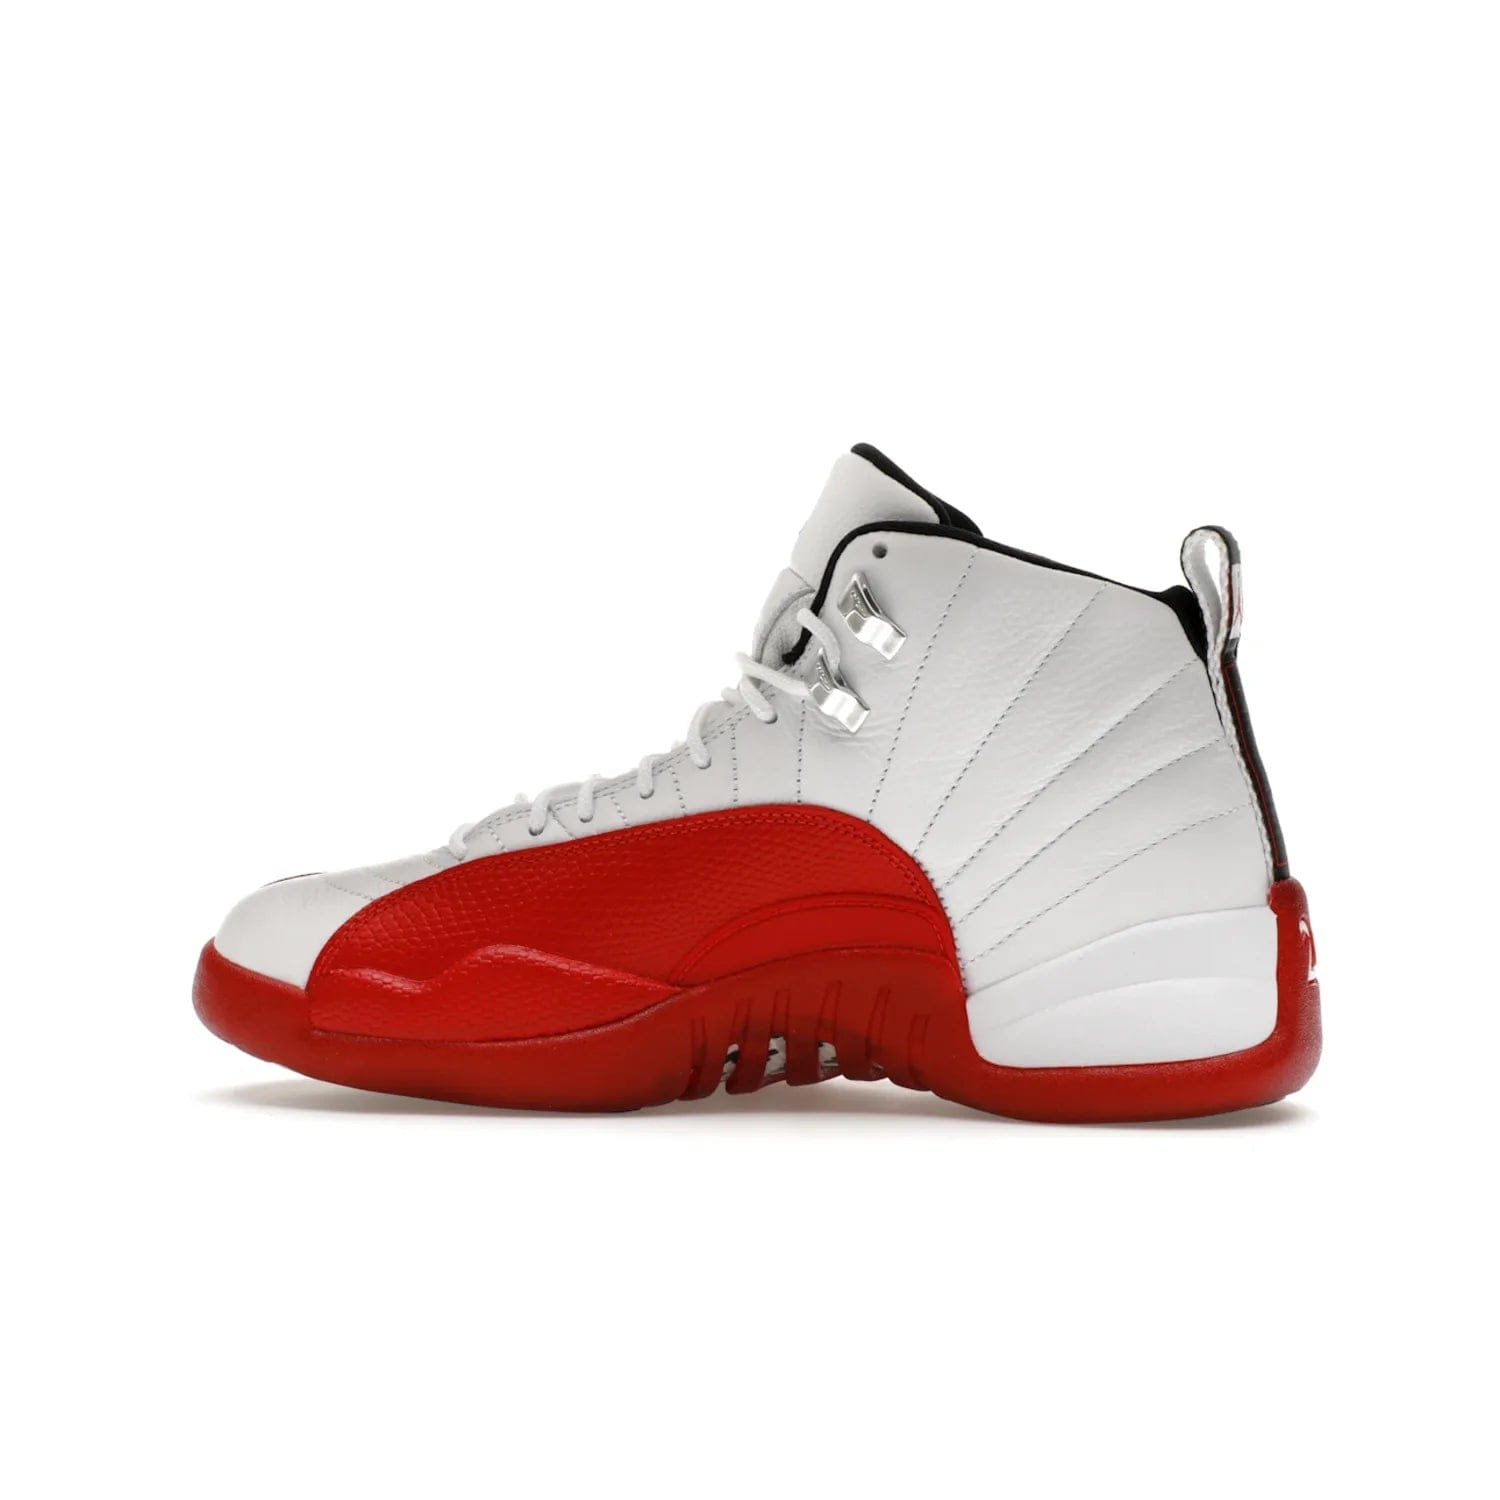 Jordan 12 Retro Cherry (2023) - Image 20 - Only at www.BallersClubKickz.com - Live your sneaker legend with the Jordan 12 Retro Cherry. Iconic pebbled leather mudguards, quilted uppers, and varsity red accents make this 1997 classic a must-have for 2023. Shine on with silver hardware and matching midsoles, and bring it all together for limited-edition style on October 28th. Step into Jordan legacy with the Retro Cherry.